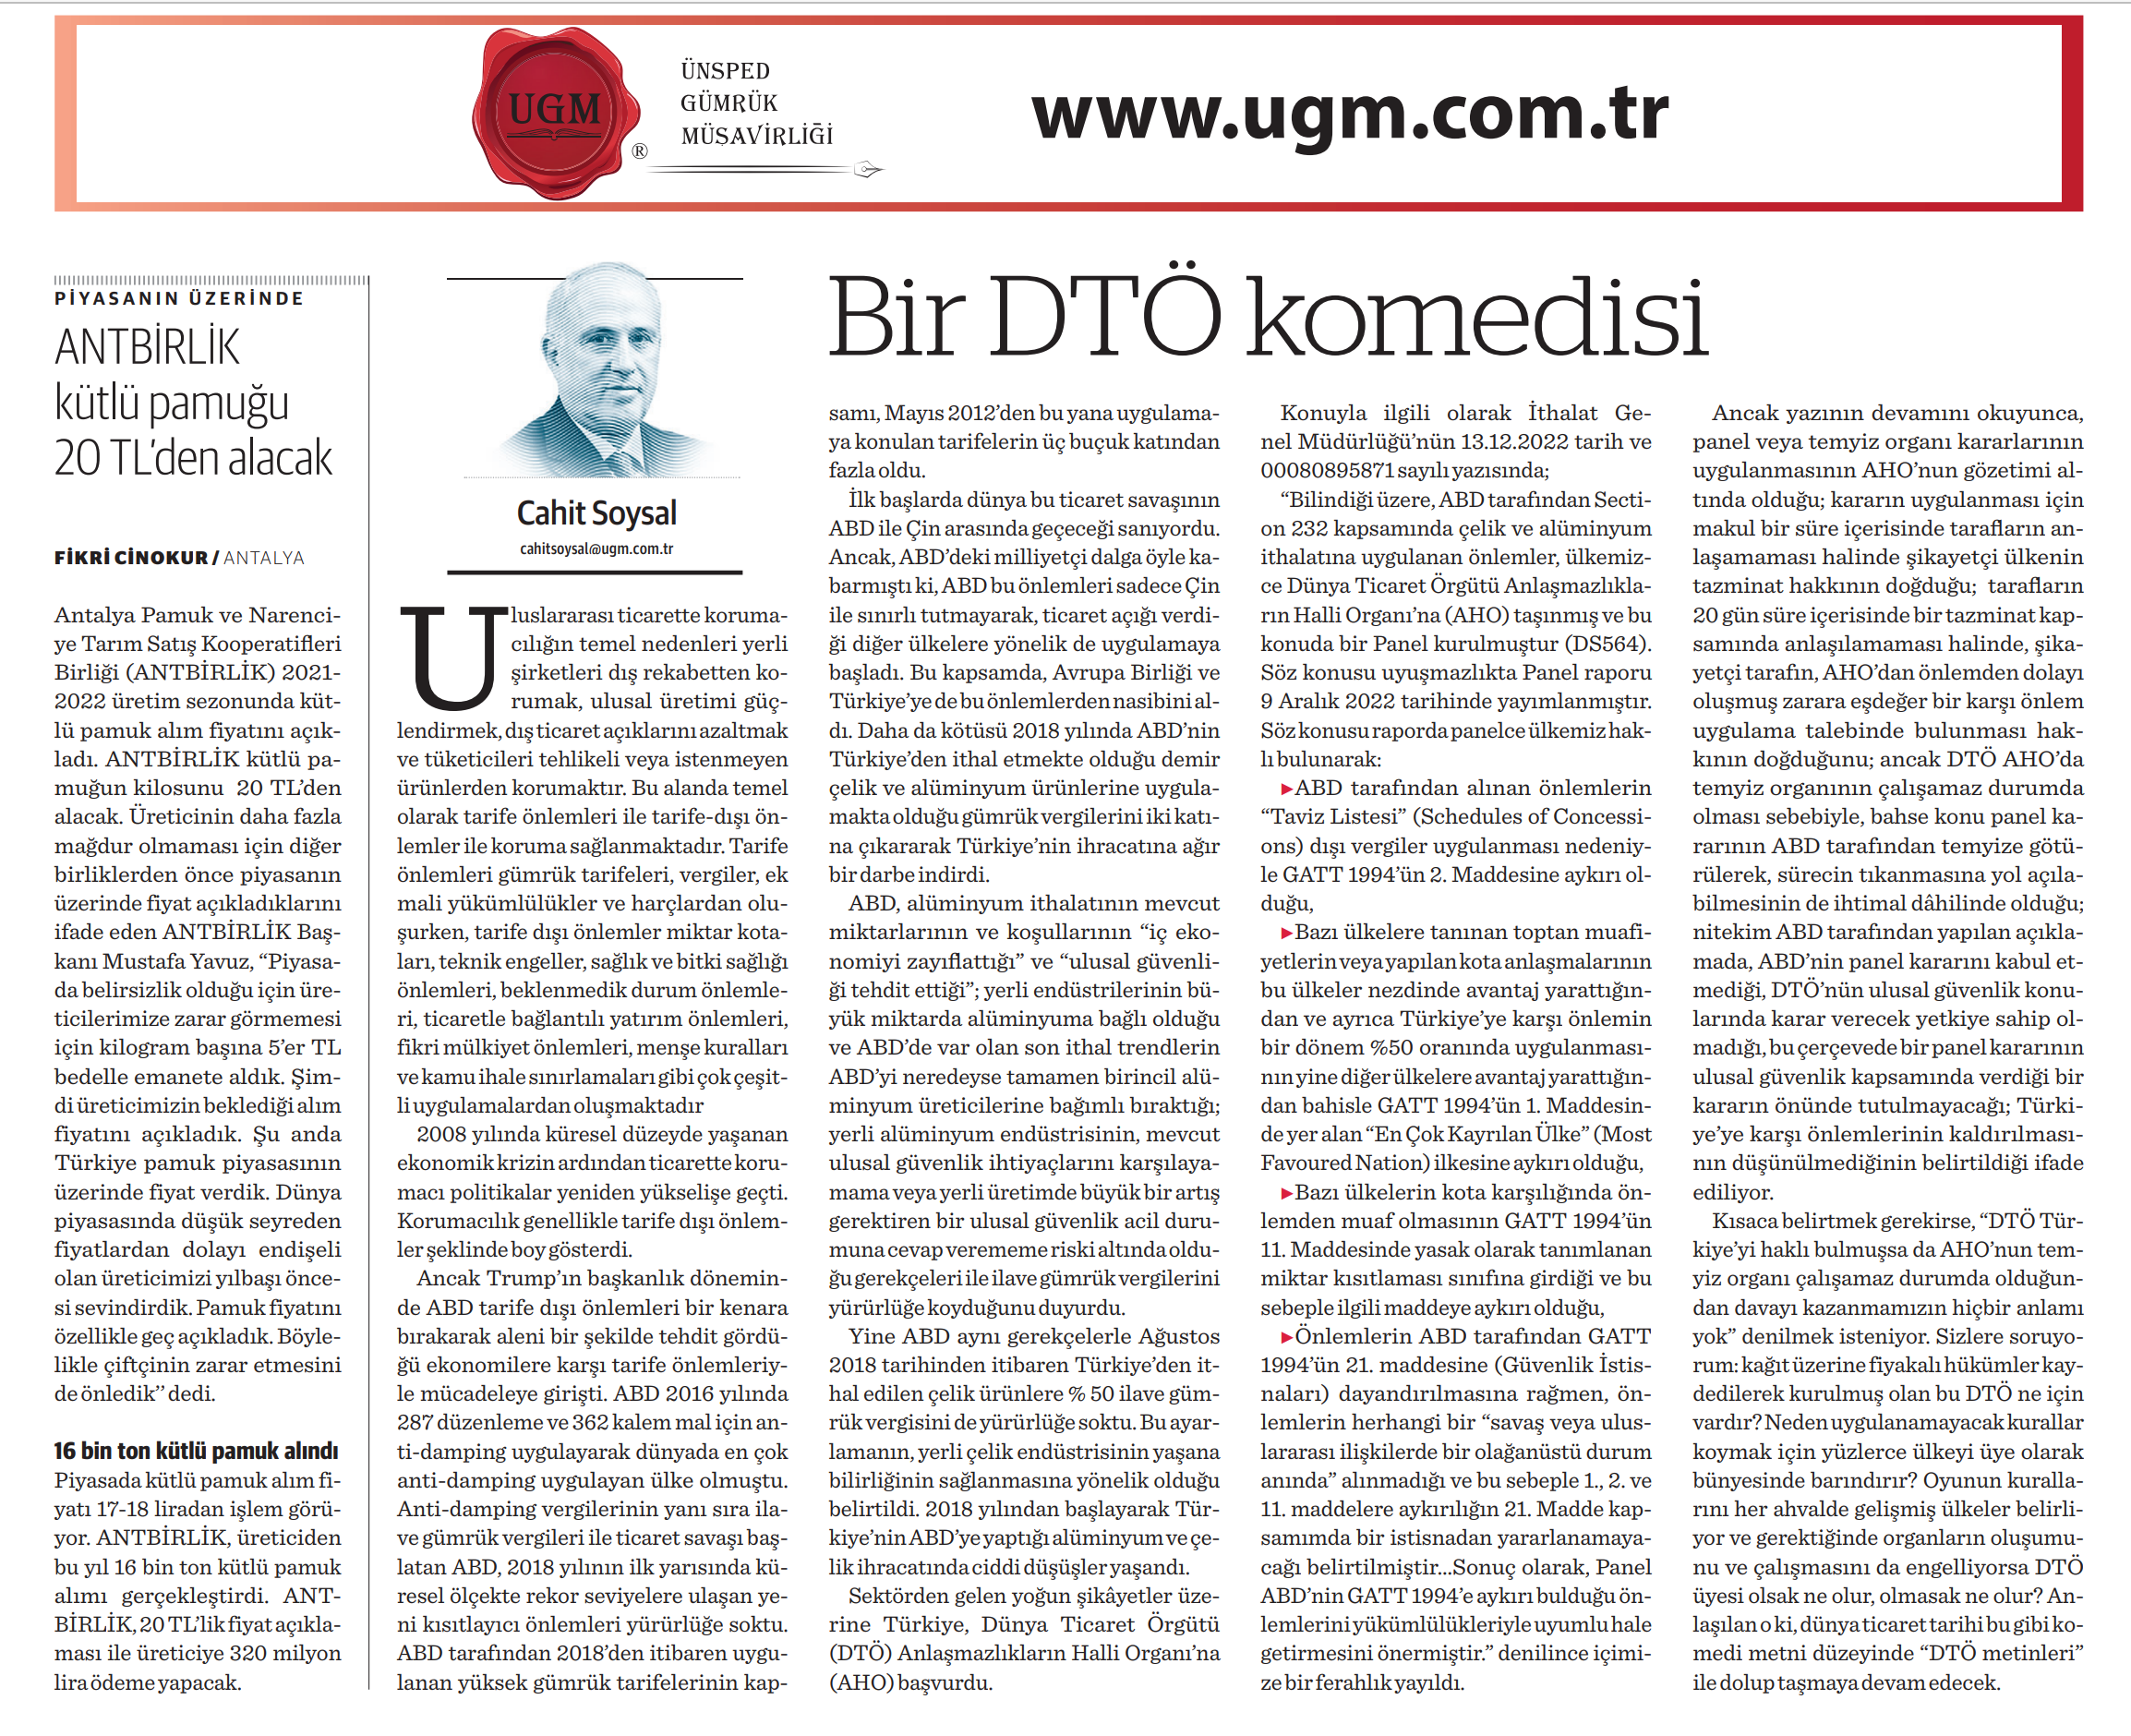 Our Board Member H. Cahit SOYSAL's Article Titled A WTO Comedy Was Published in What Kind of Economy on 26.12.2022